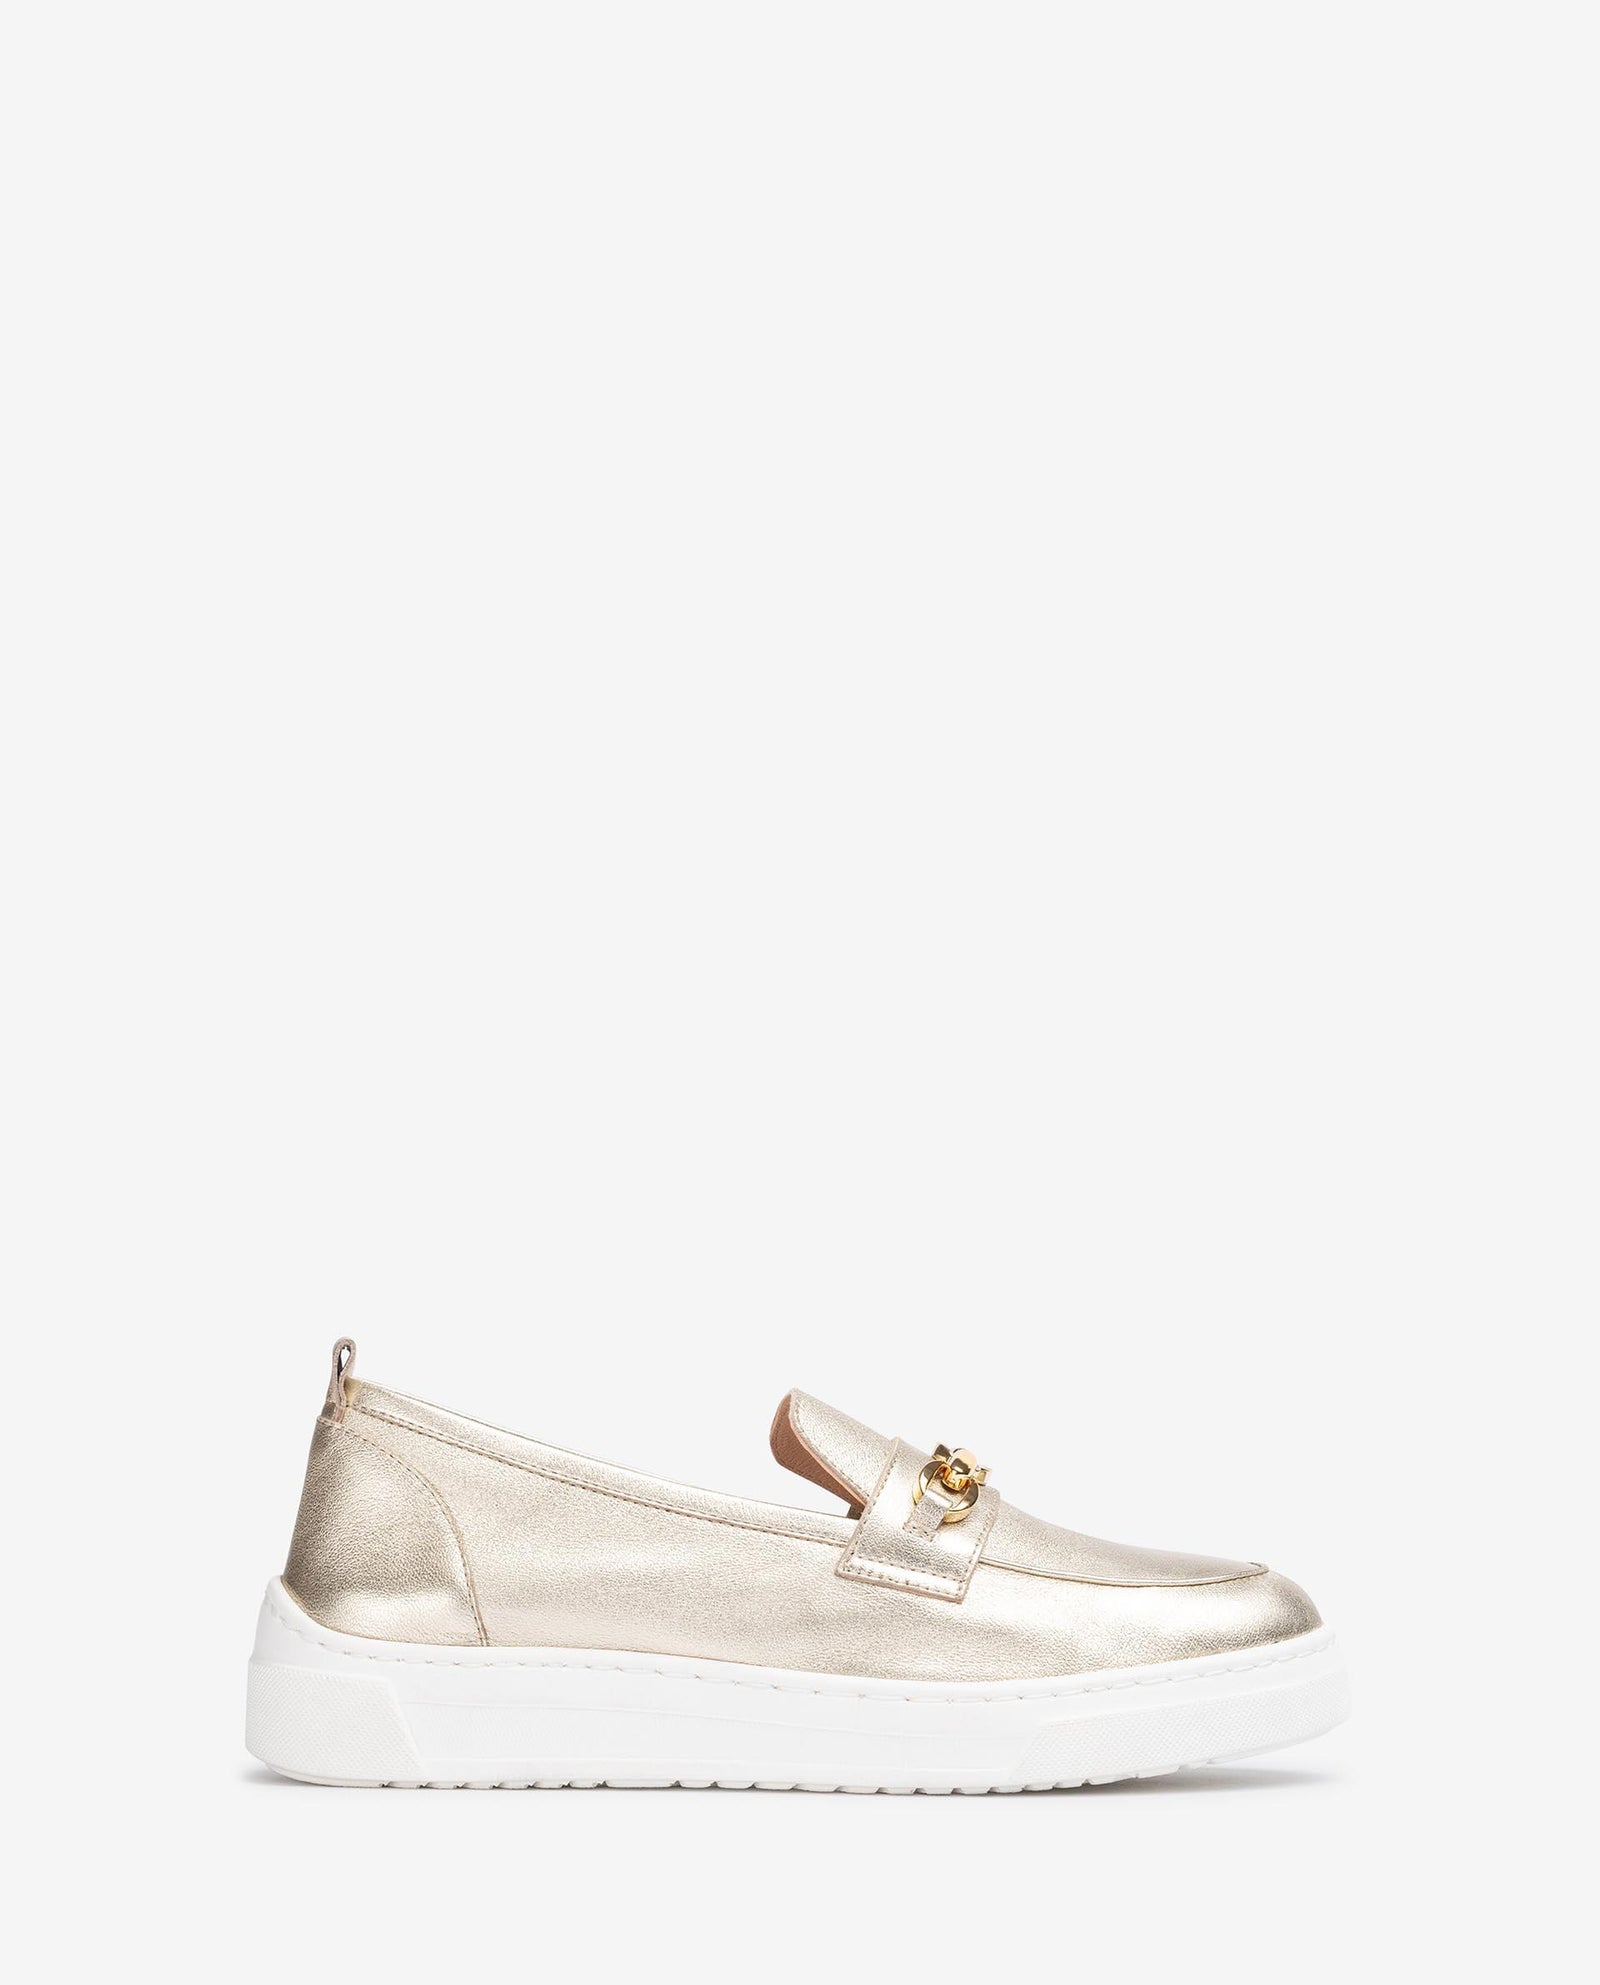     Front view of Unisa FINDAY SuperLight Metallic Loafer in Gold.